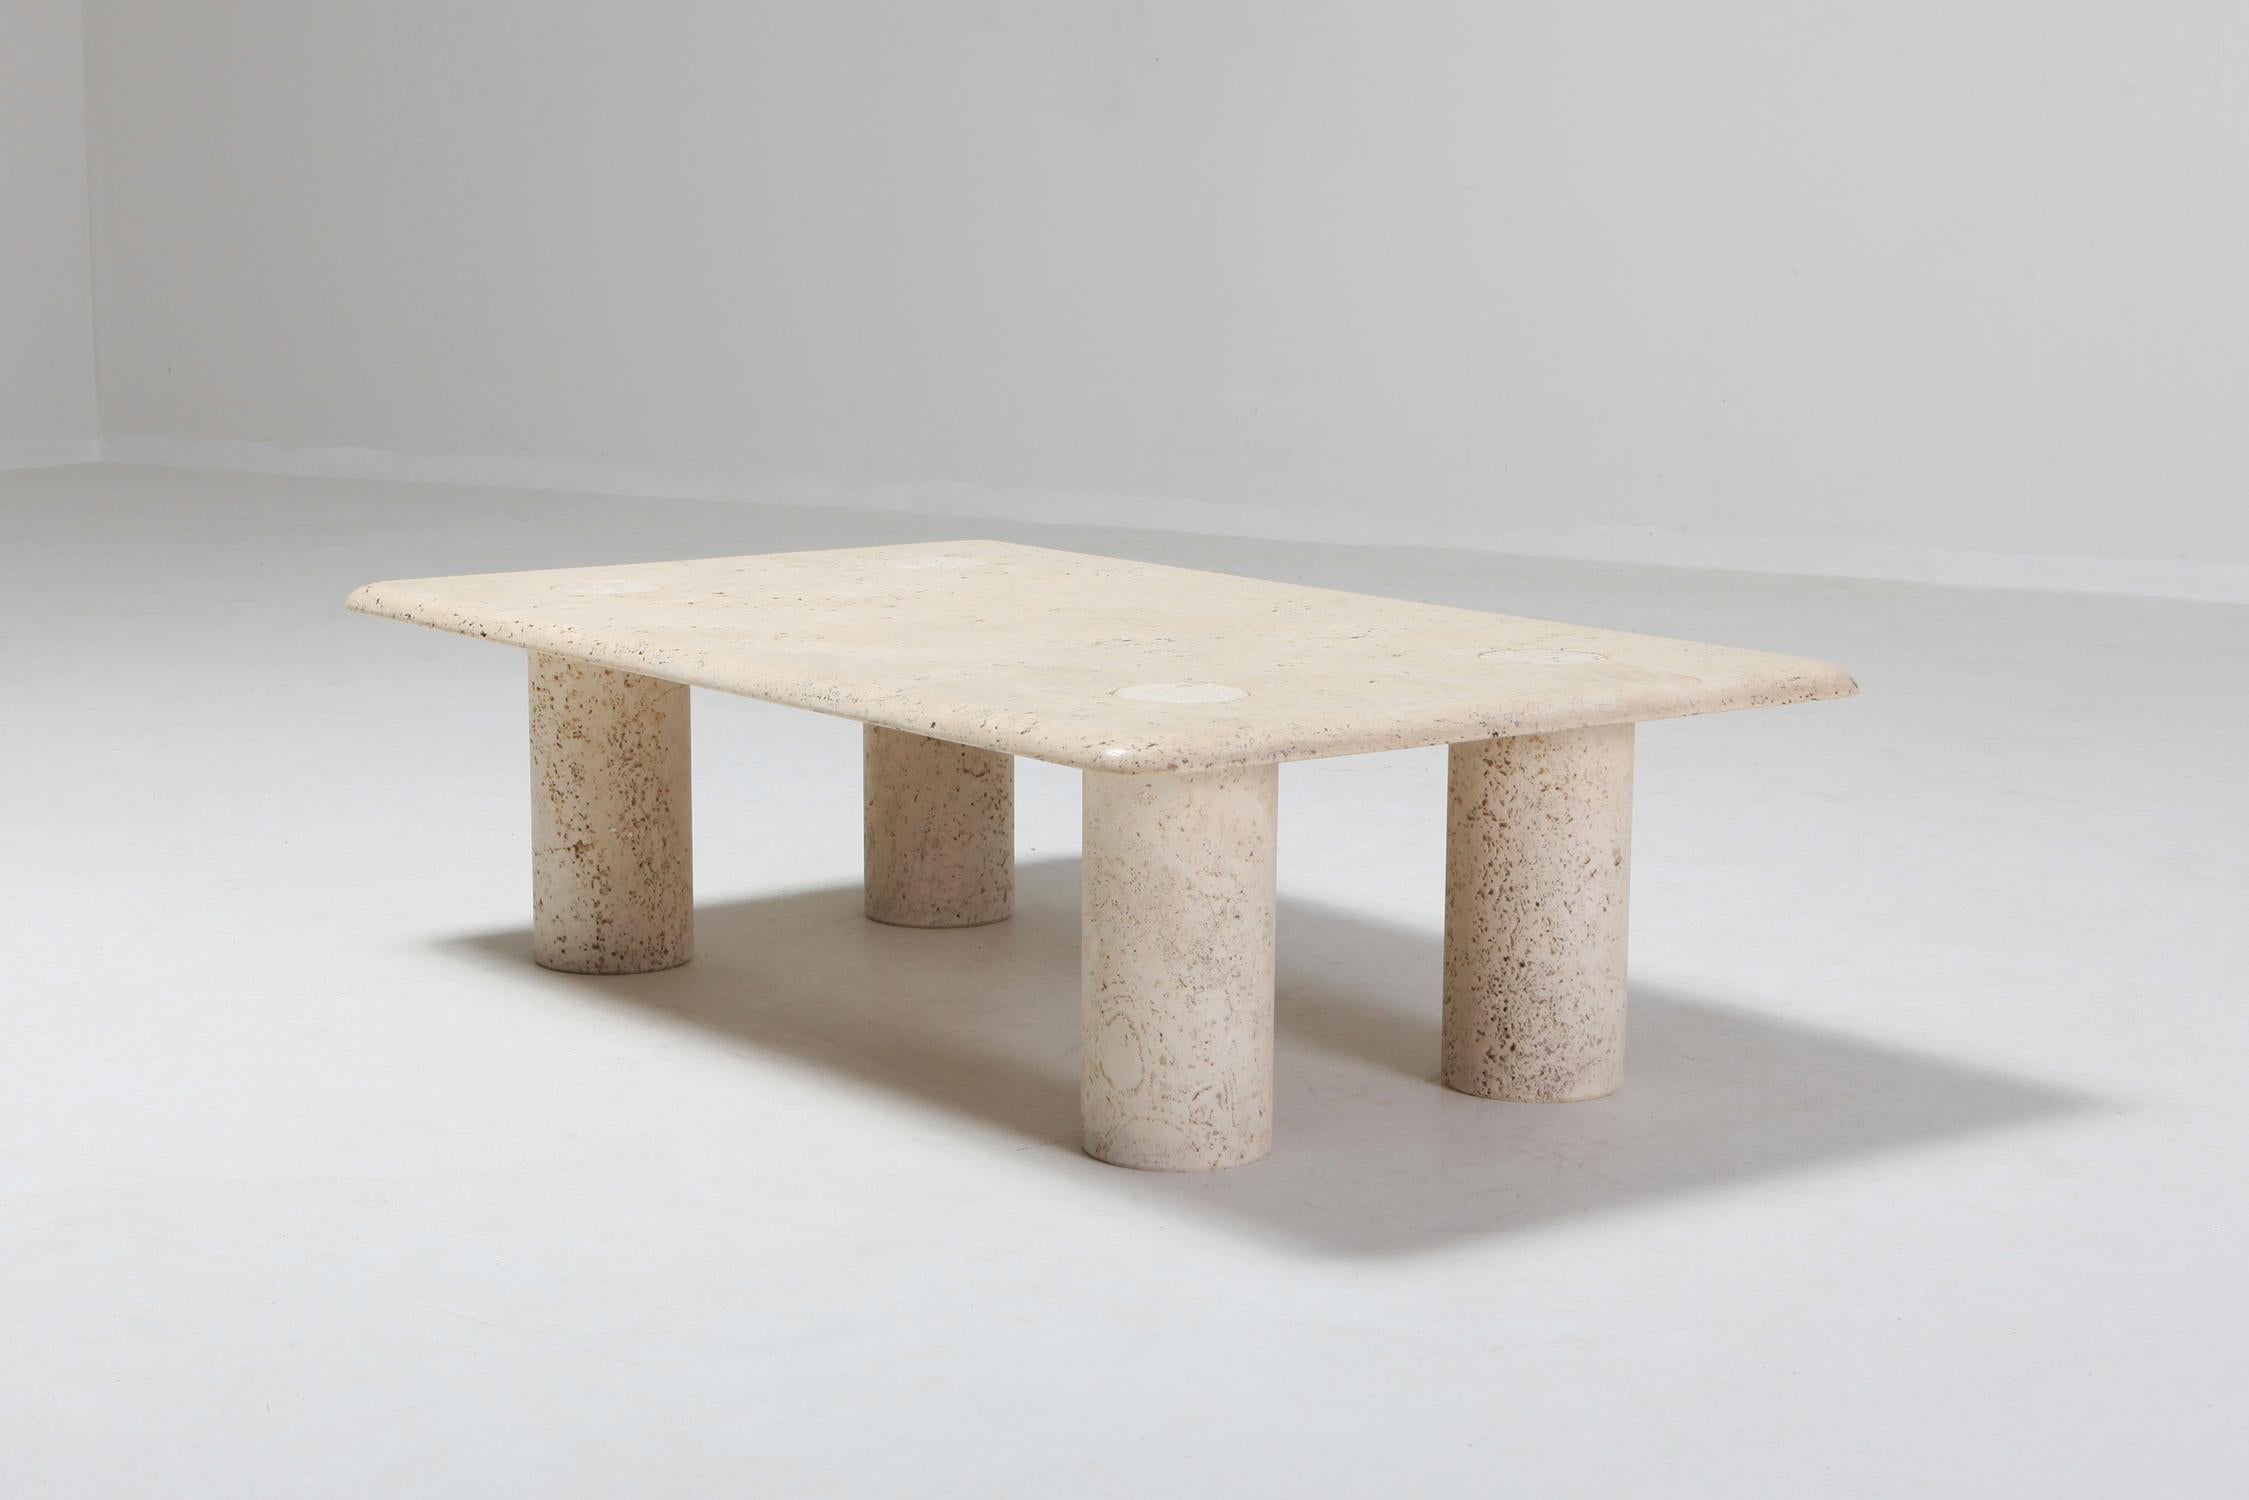 Travertine marble rectangular coffee table designed by Angelo Mangiarotti for Up & Up, Italy.
Postmodern piece that's really in trend in 2019.
The quality of the travertine is amazing; quite hard to find similar quality nowadays.
The edges are